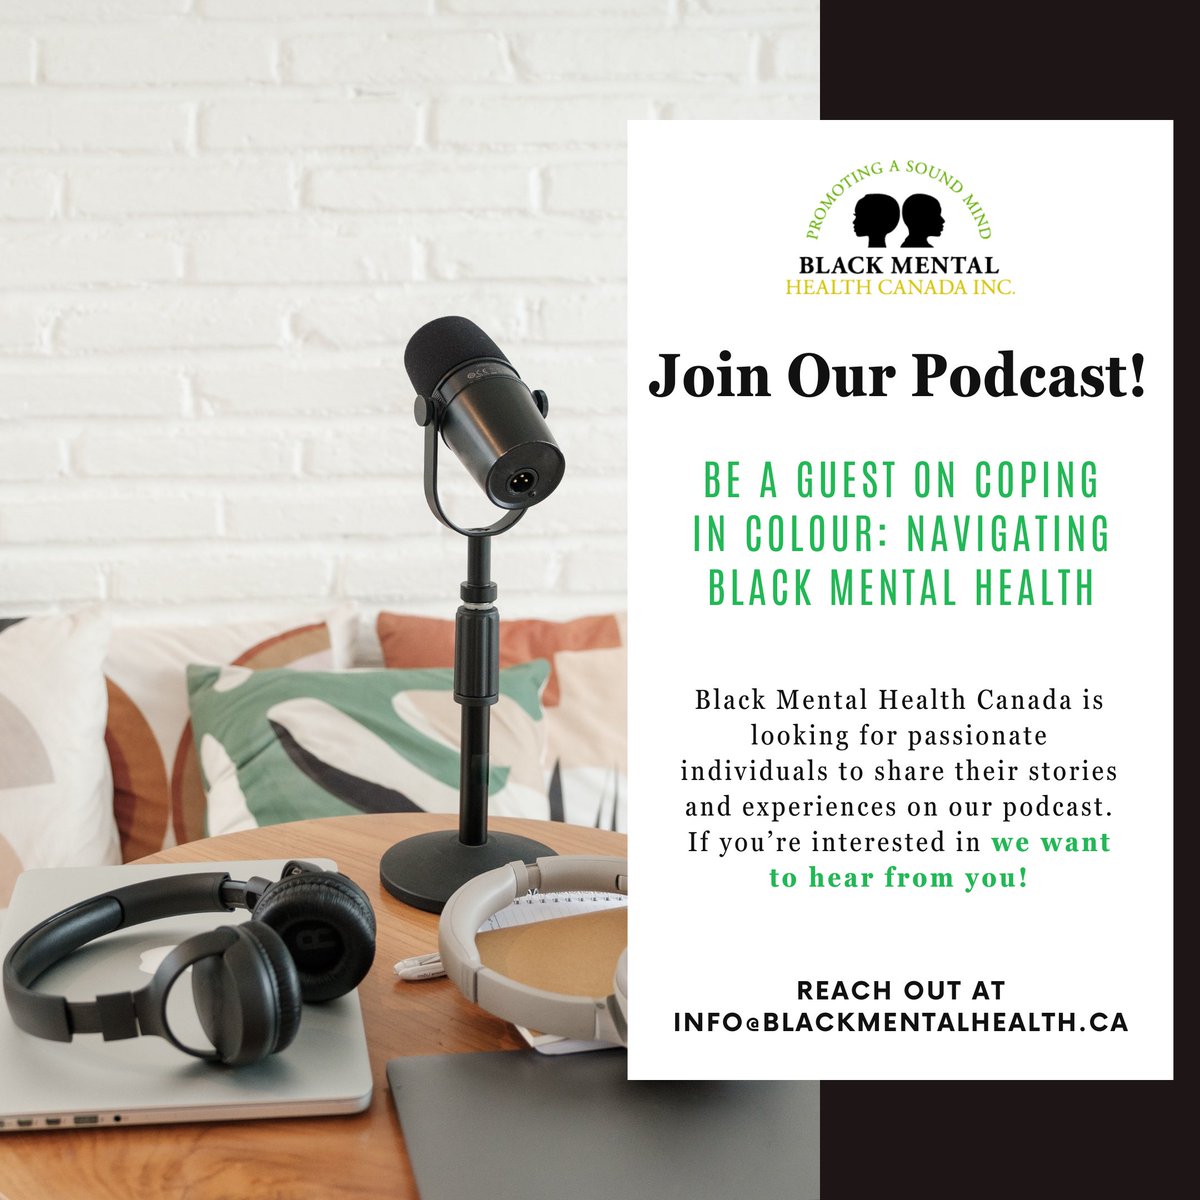 Do you want to share your story and inspire others? Black Mental Health Canada is seeking guests for our podcast, Coping In Colour: Navigating Black Mental Health. Interested? Contact us at info@blackmentalhealth.ca.